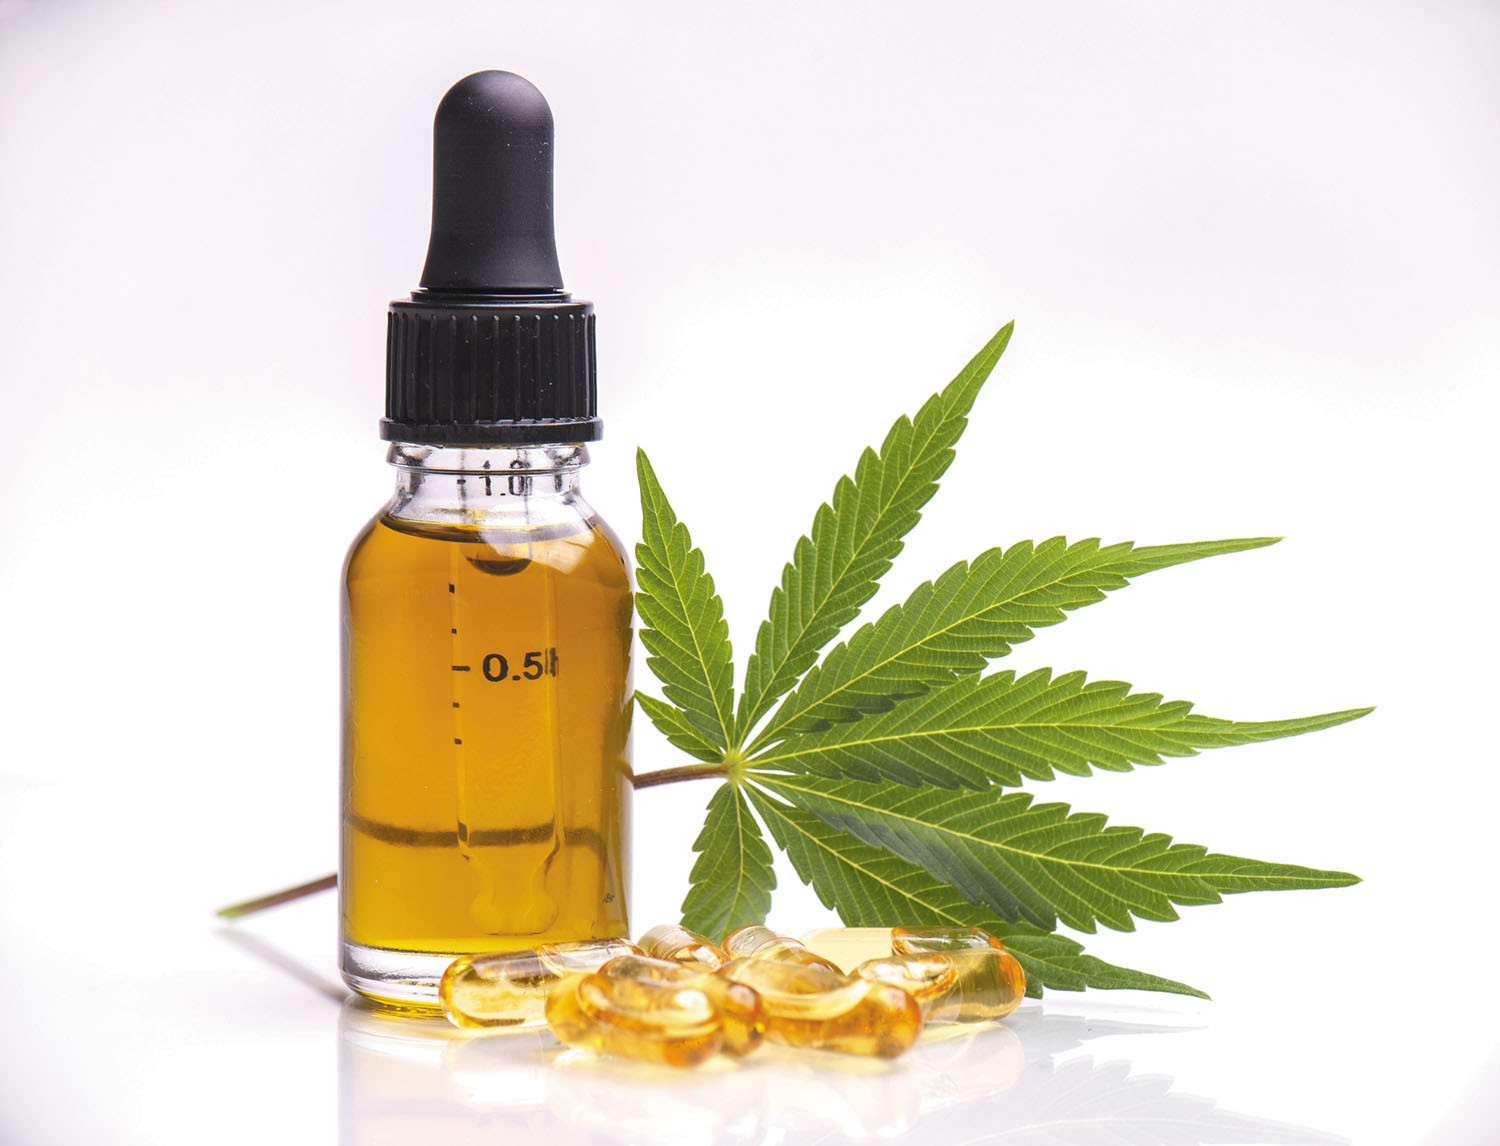 Why CBD oil is called beneficial?